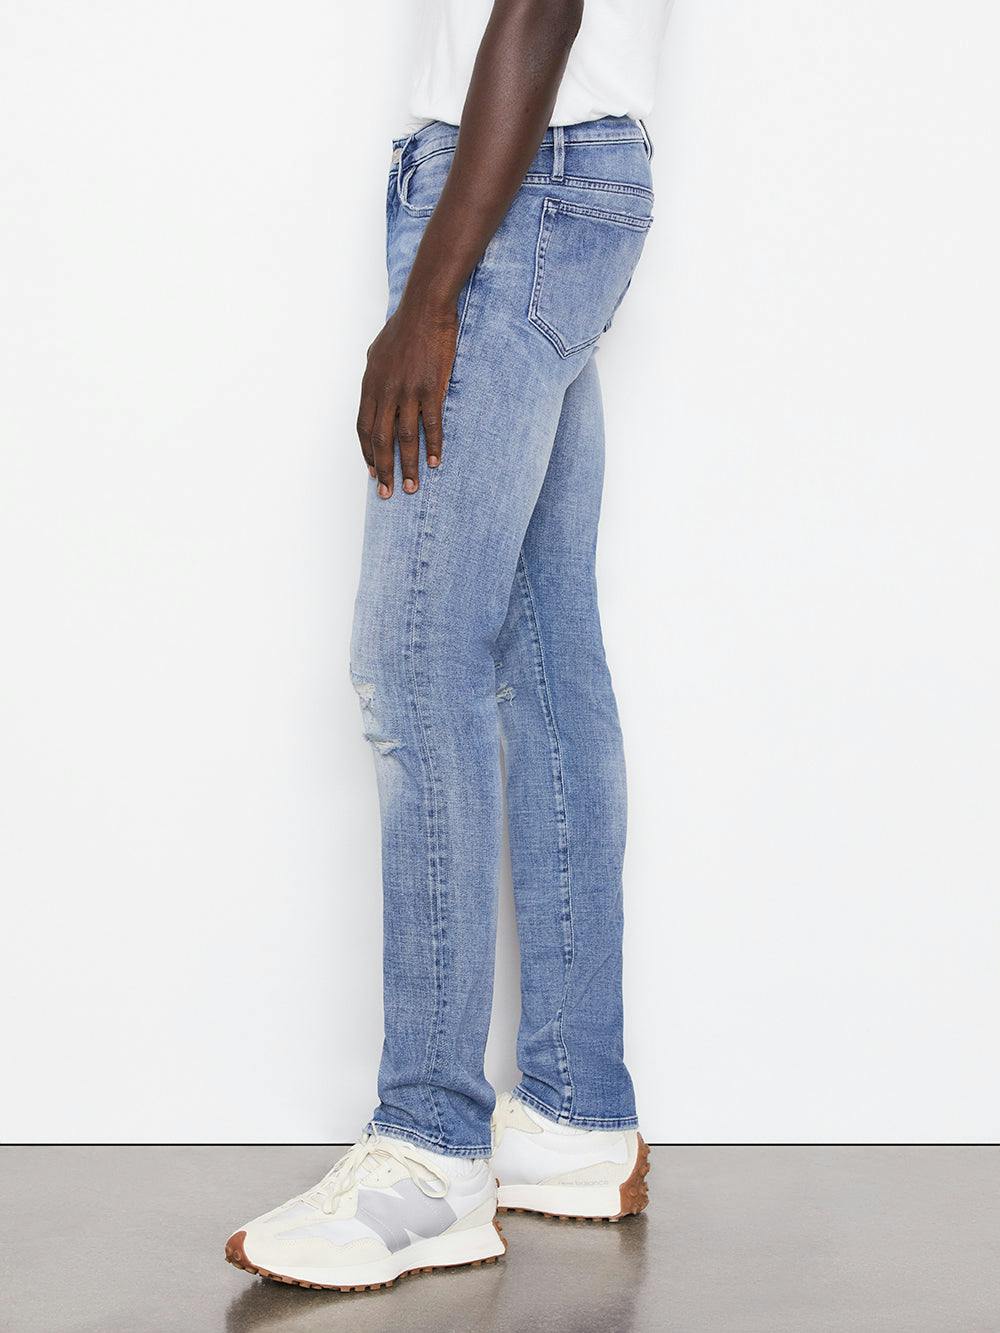 jeans side view